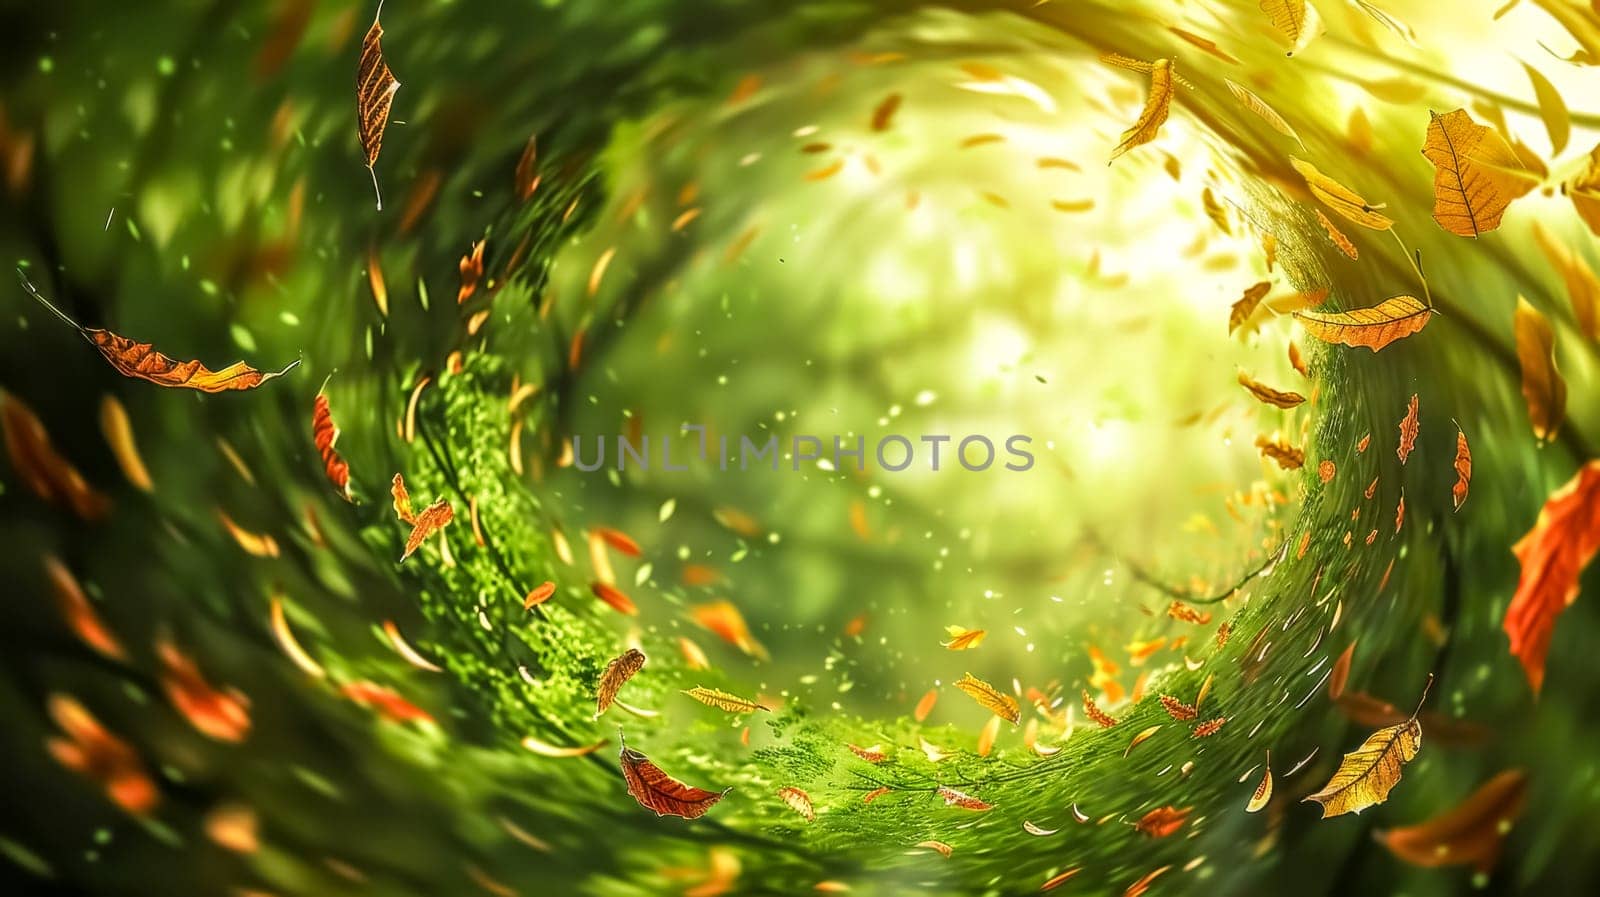 Autumn whirlwind - leaves in swirling motion by Edophoto